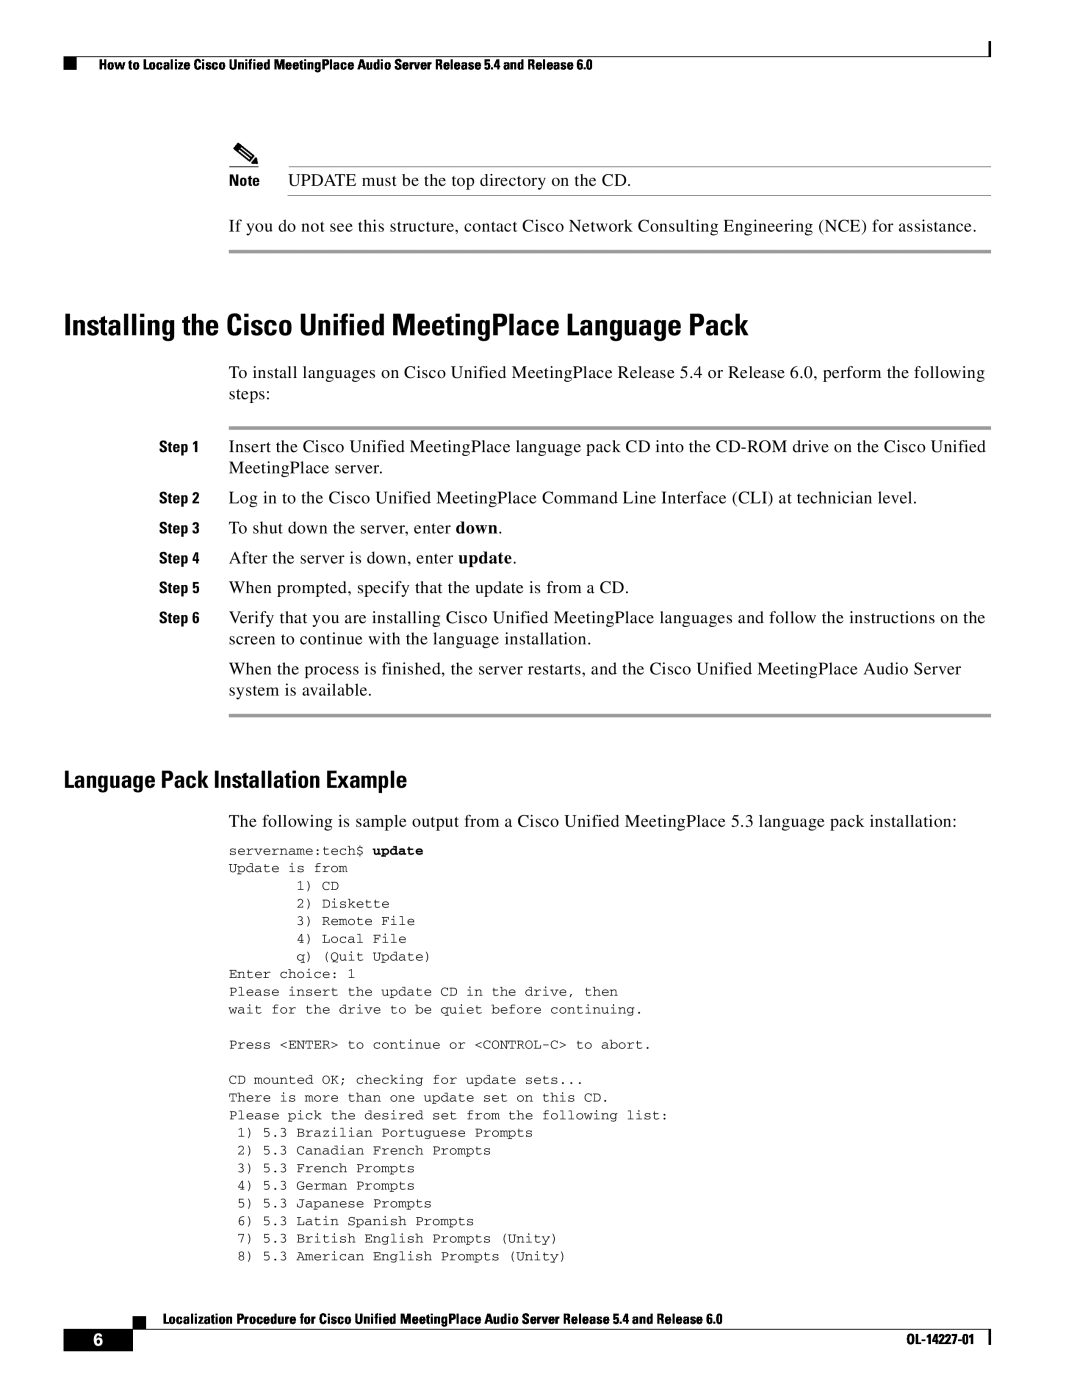 Cisco Systems 5.4, 6 manual Installing the Cisco Unified MeetingPlace Language Pack, Language Pack Installation Example 